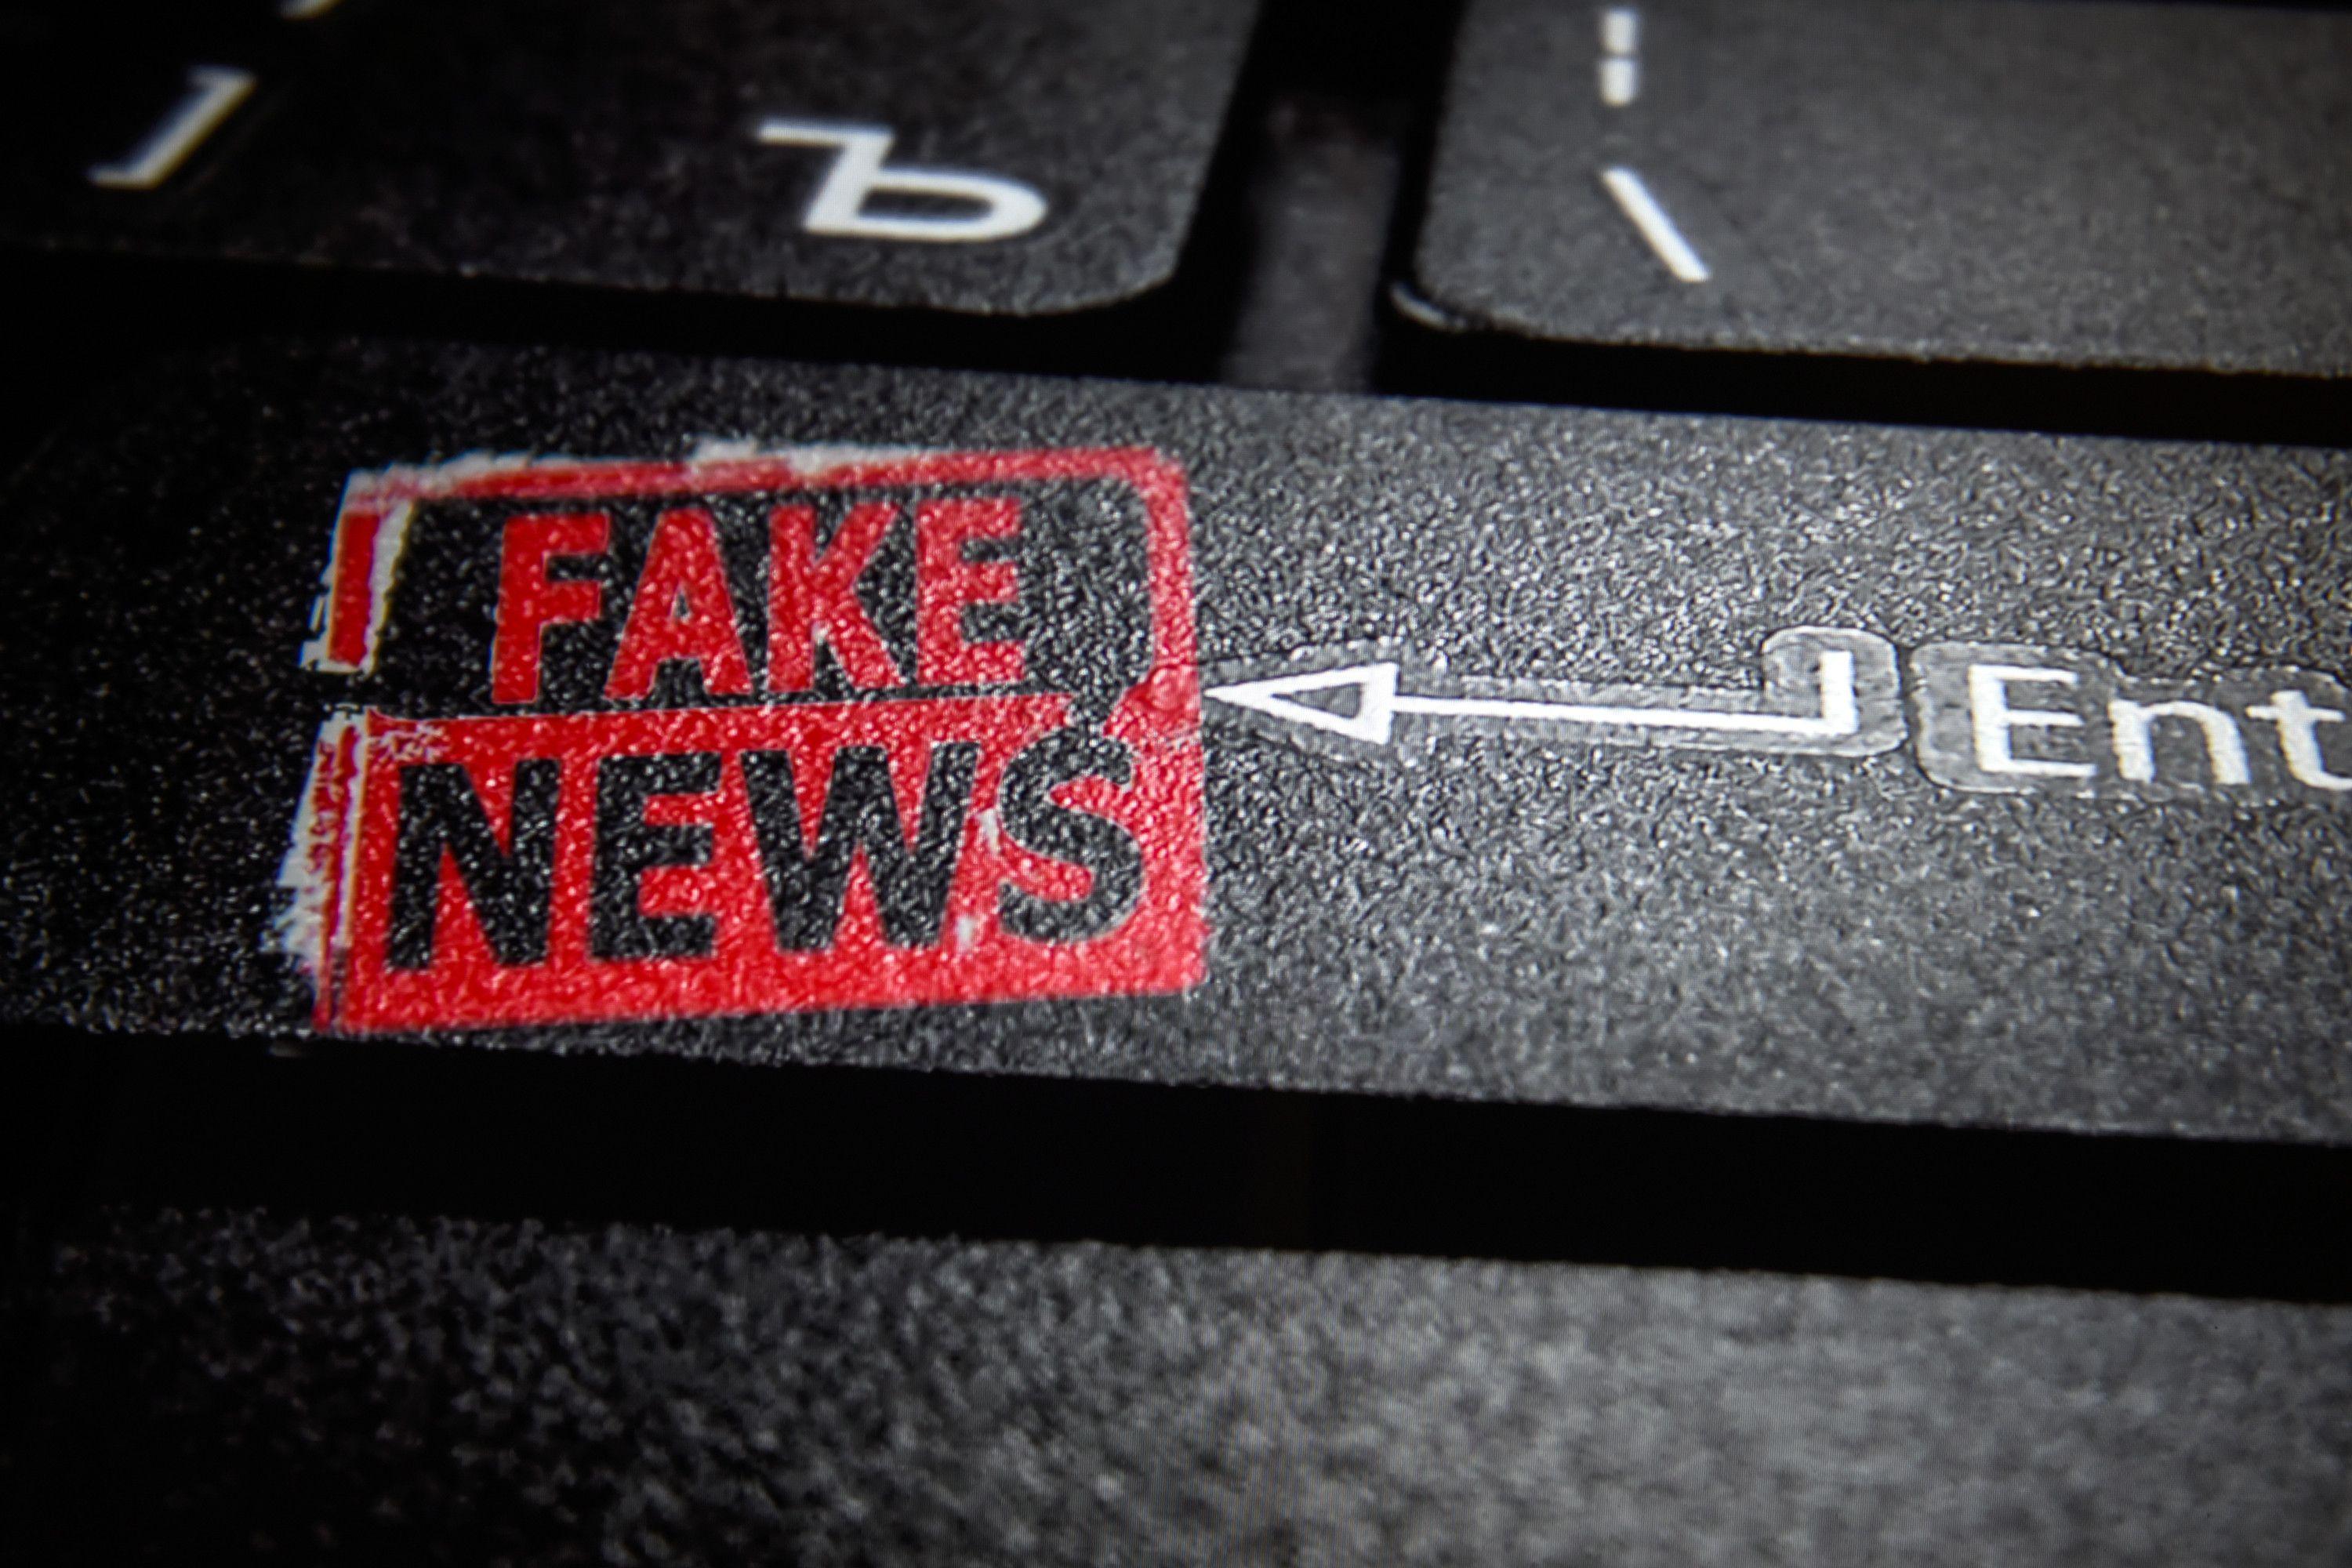 Fake Computer Logo - Researchers Retract Widely Cited Fake News Study